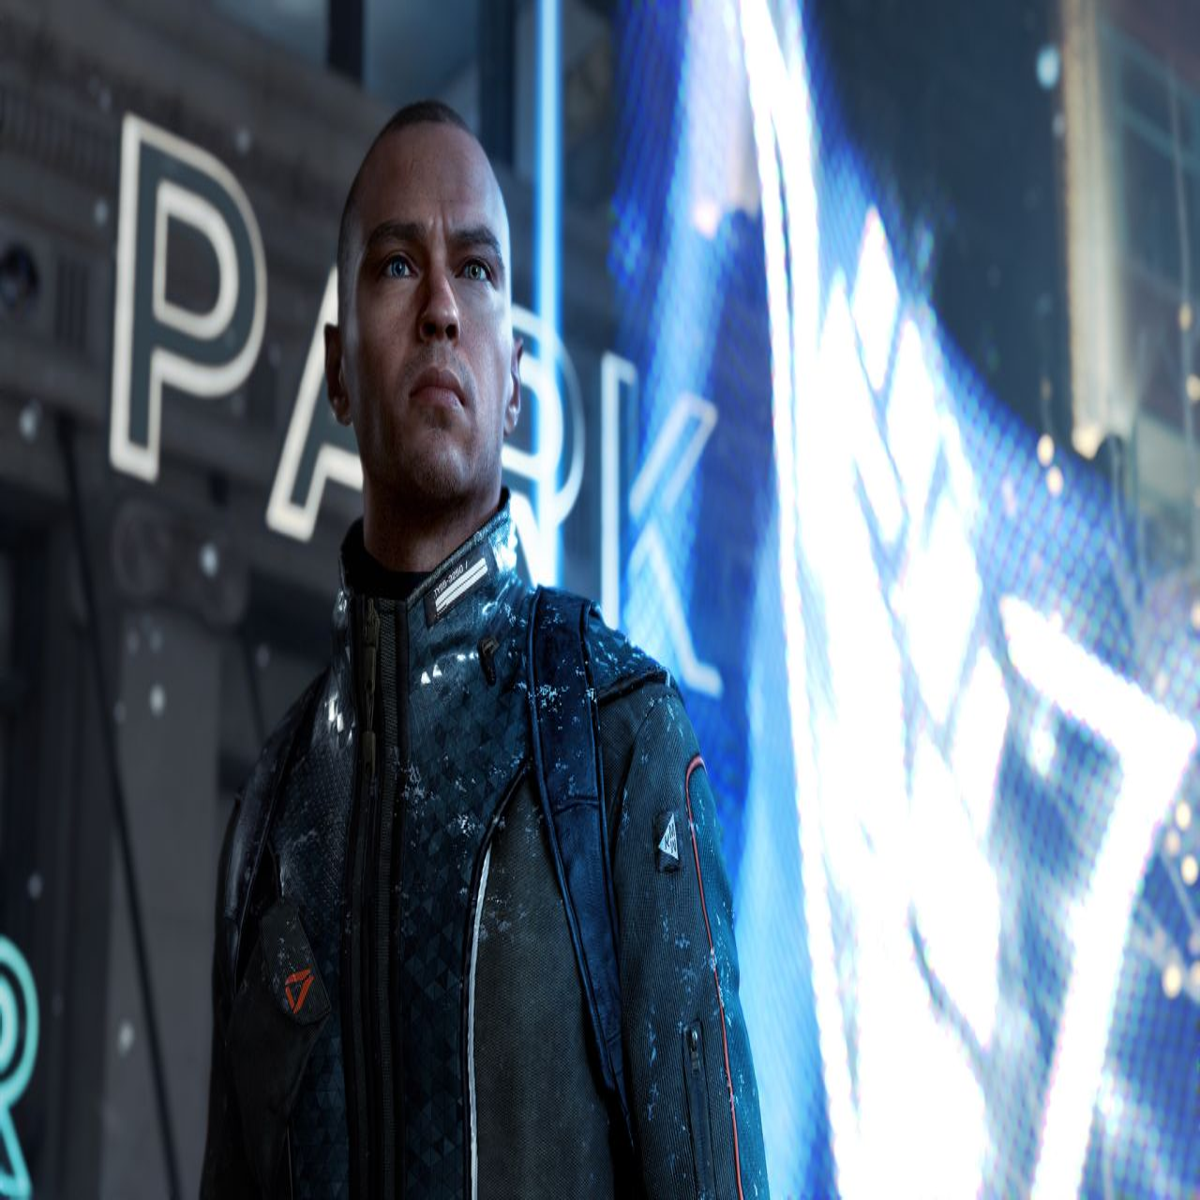 Detroit: Become Human Review  Relevant, thought provoking, and fantastic